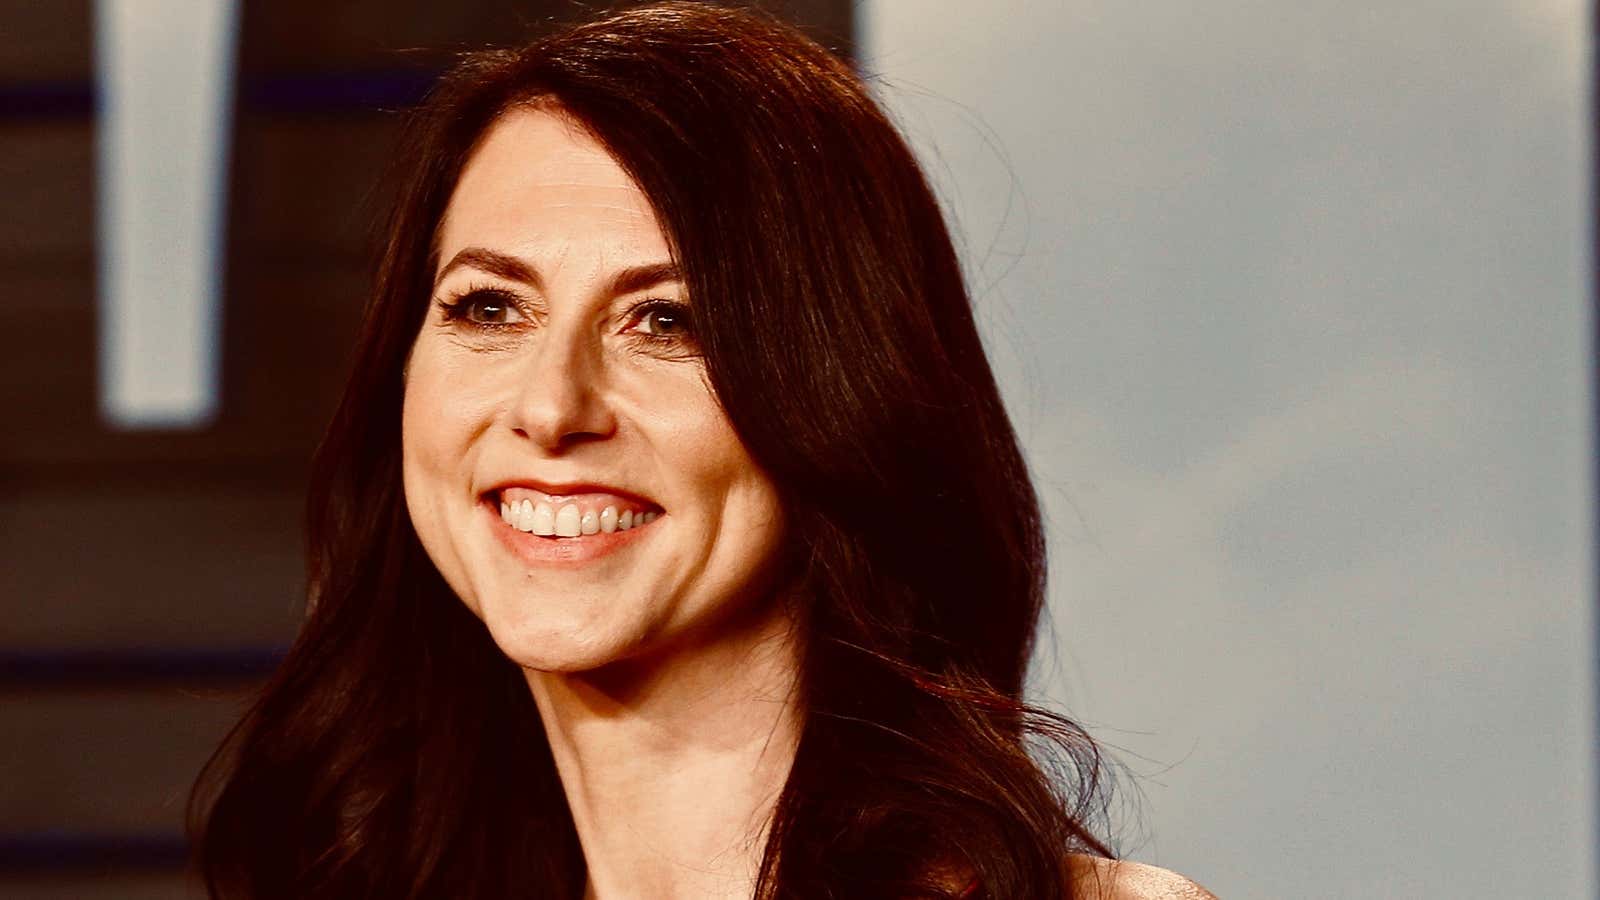 MacKenzie Bezos doesn’t seem to want us to get to know her.